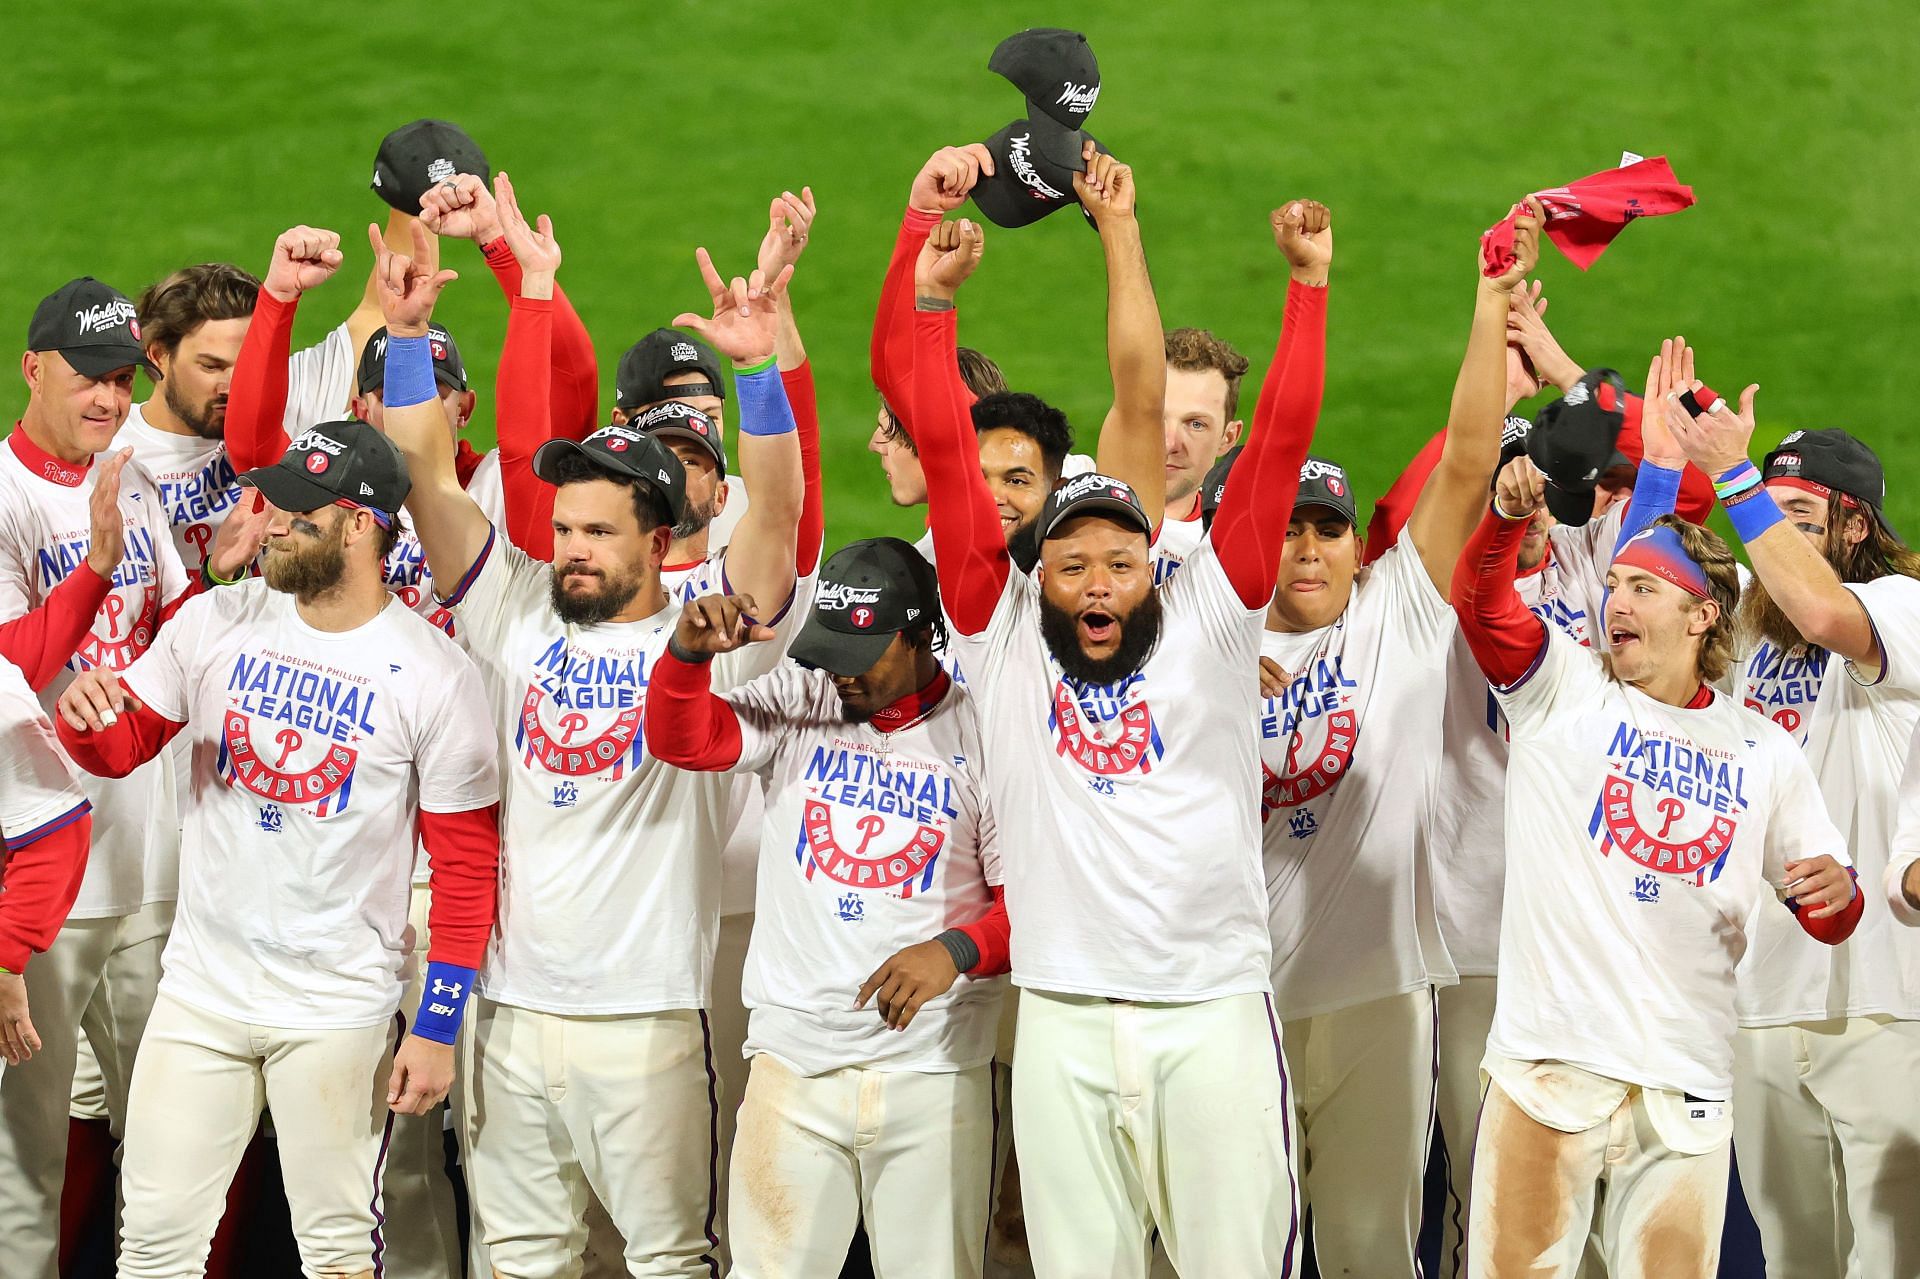 The Philadelphia Phillies won 4-1 over the San Diego Padres in the NLCS.